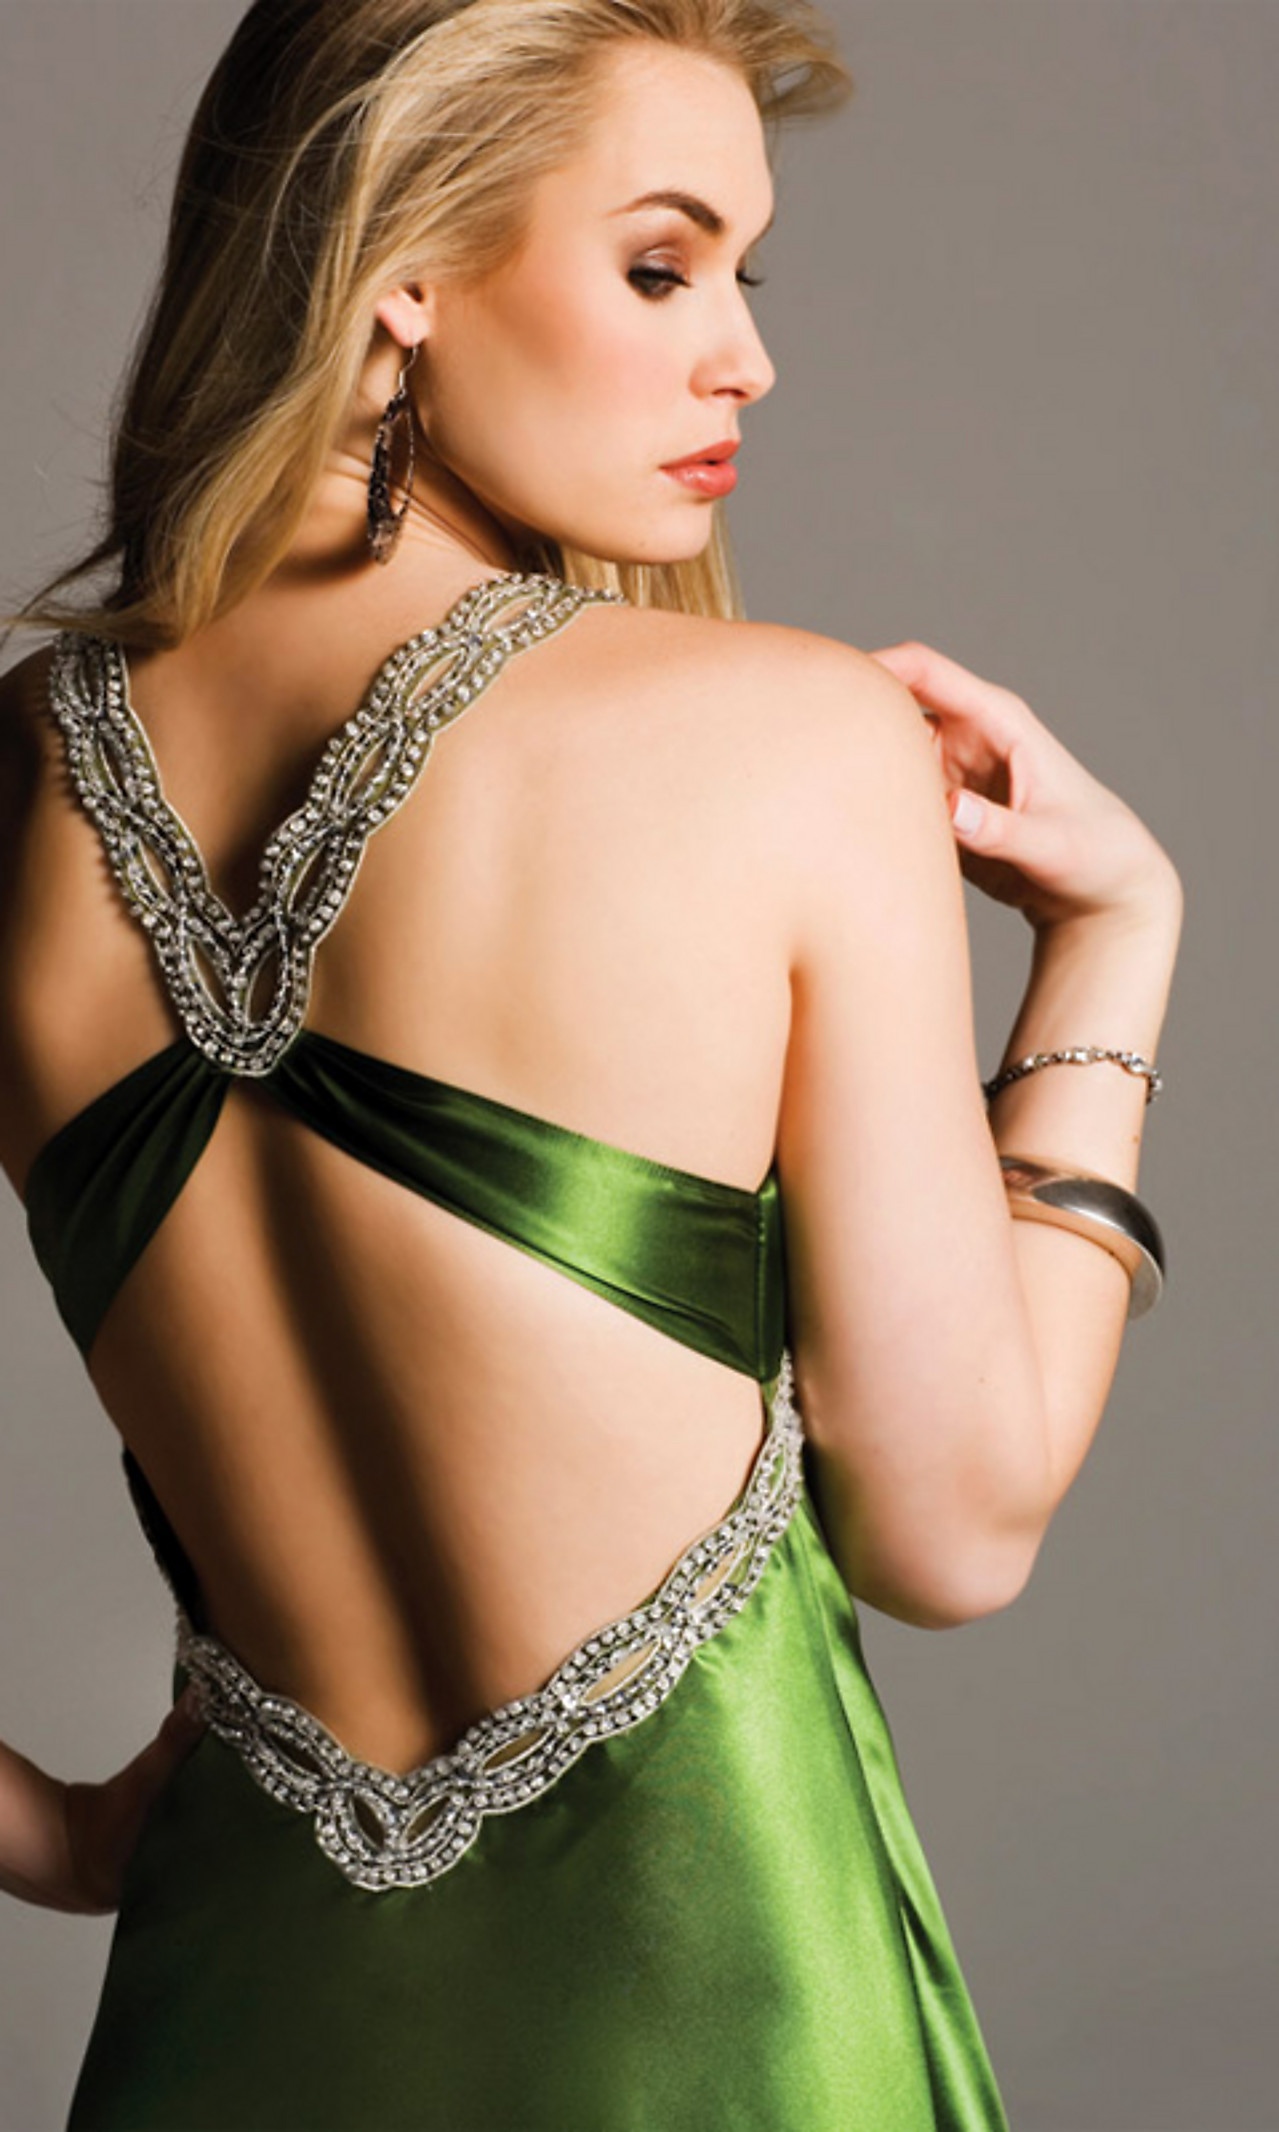 Halter Neck Green Silky Satin Floor Length Evening Dress of Beaded Accents at Front and Back